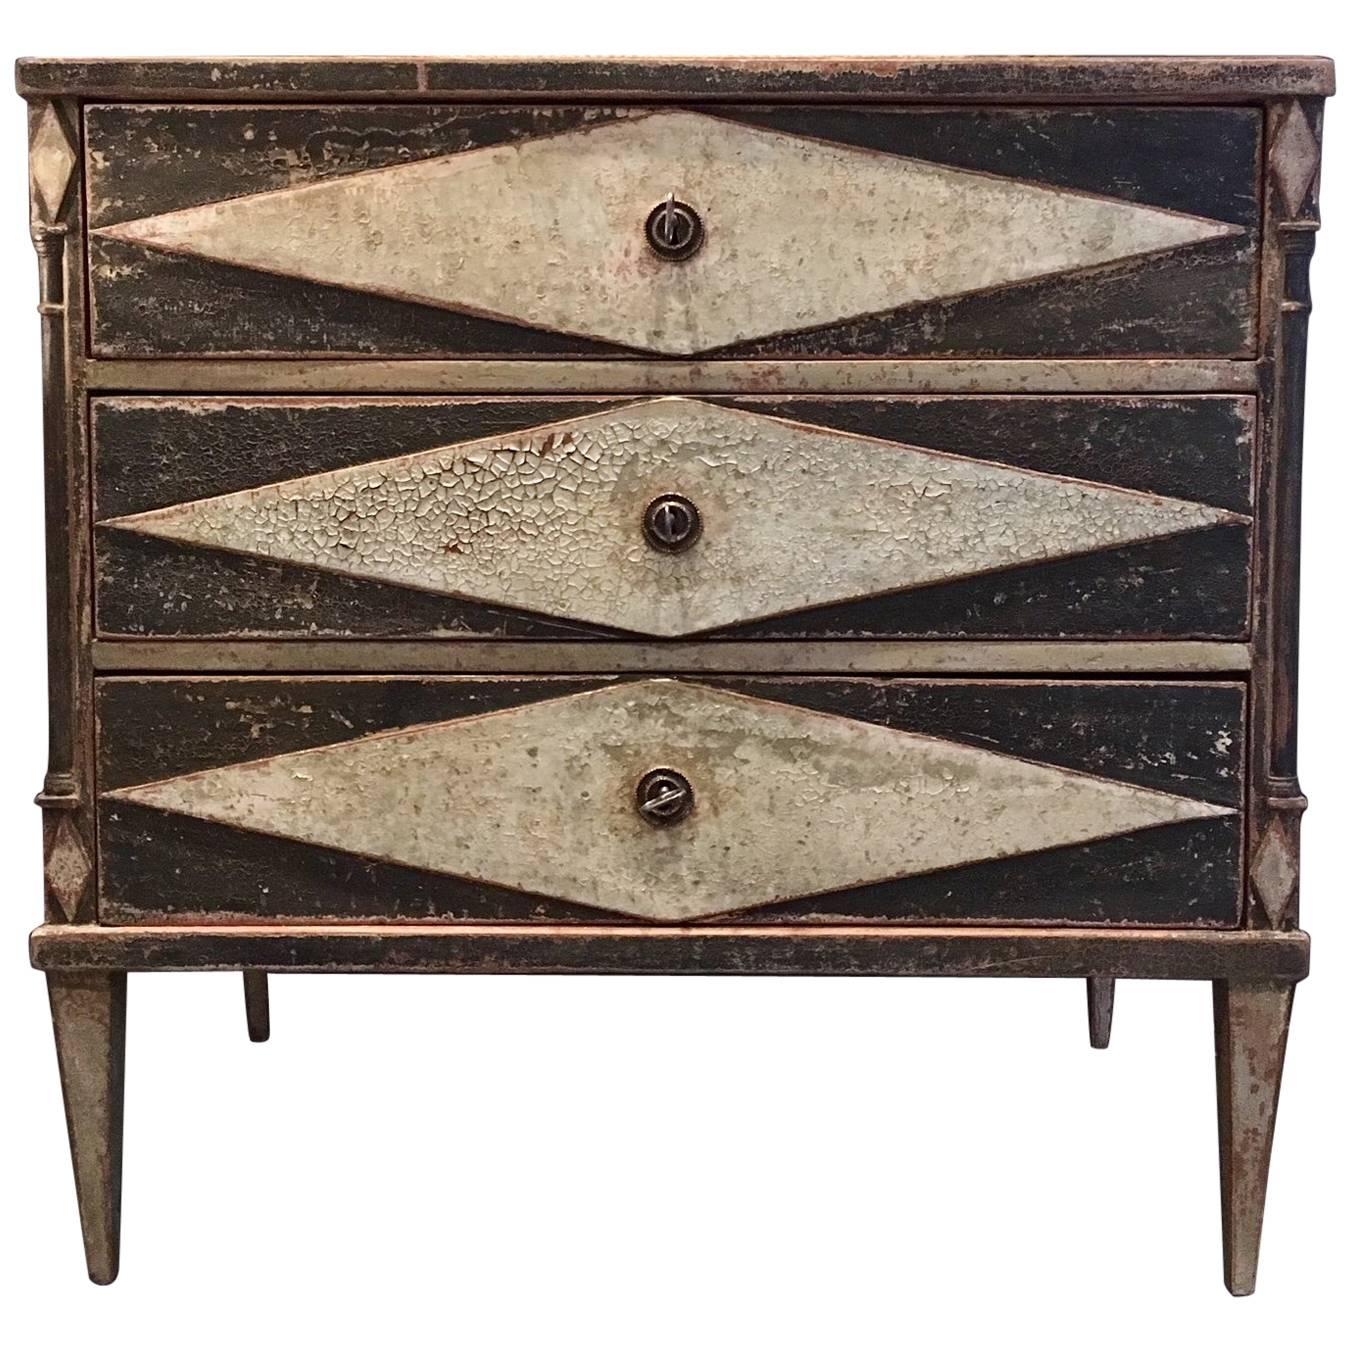 Charming Antique Commode with a Beautiful Patine and Craquelure